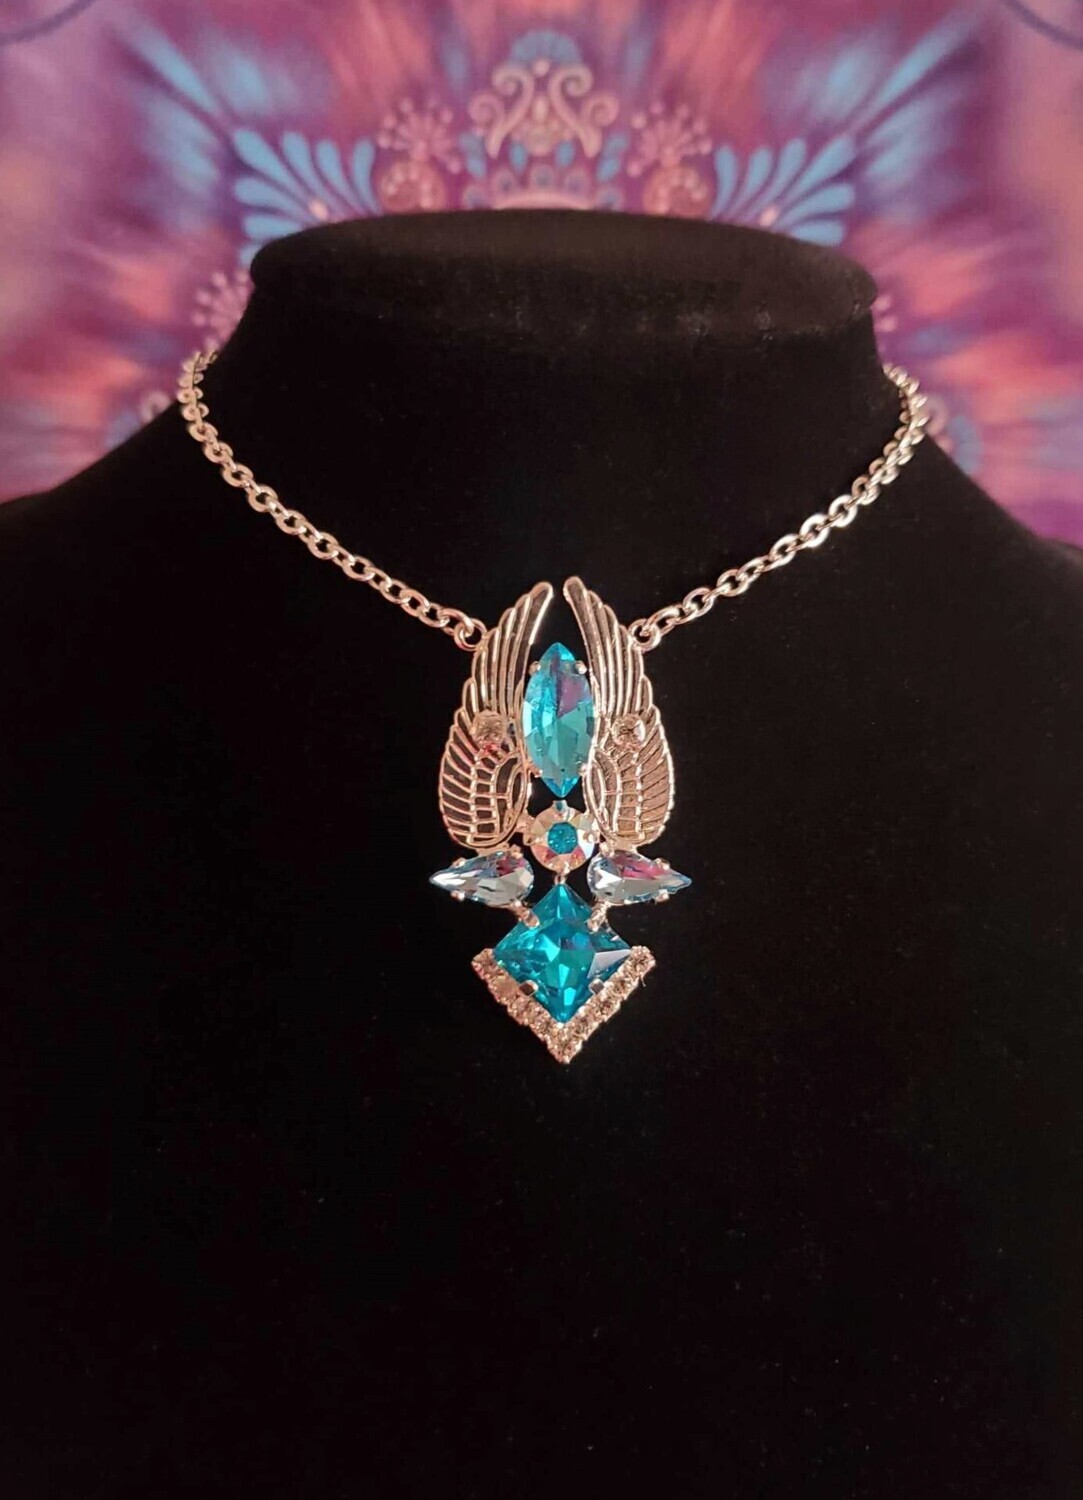 Gorgeous Aquamarine Ray Seraphin Wings of Light of Venus/Archangel Realms Channeling Activator & A Ray/Radiant Codes pendant $444.00